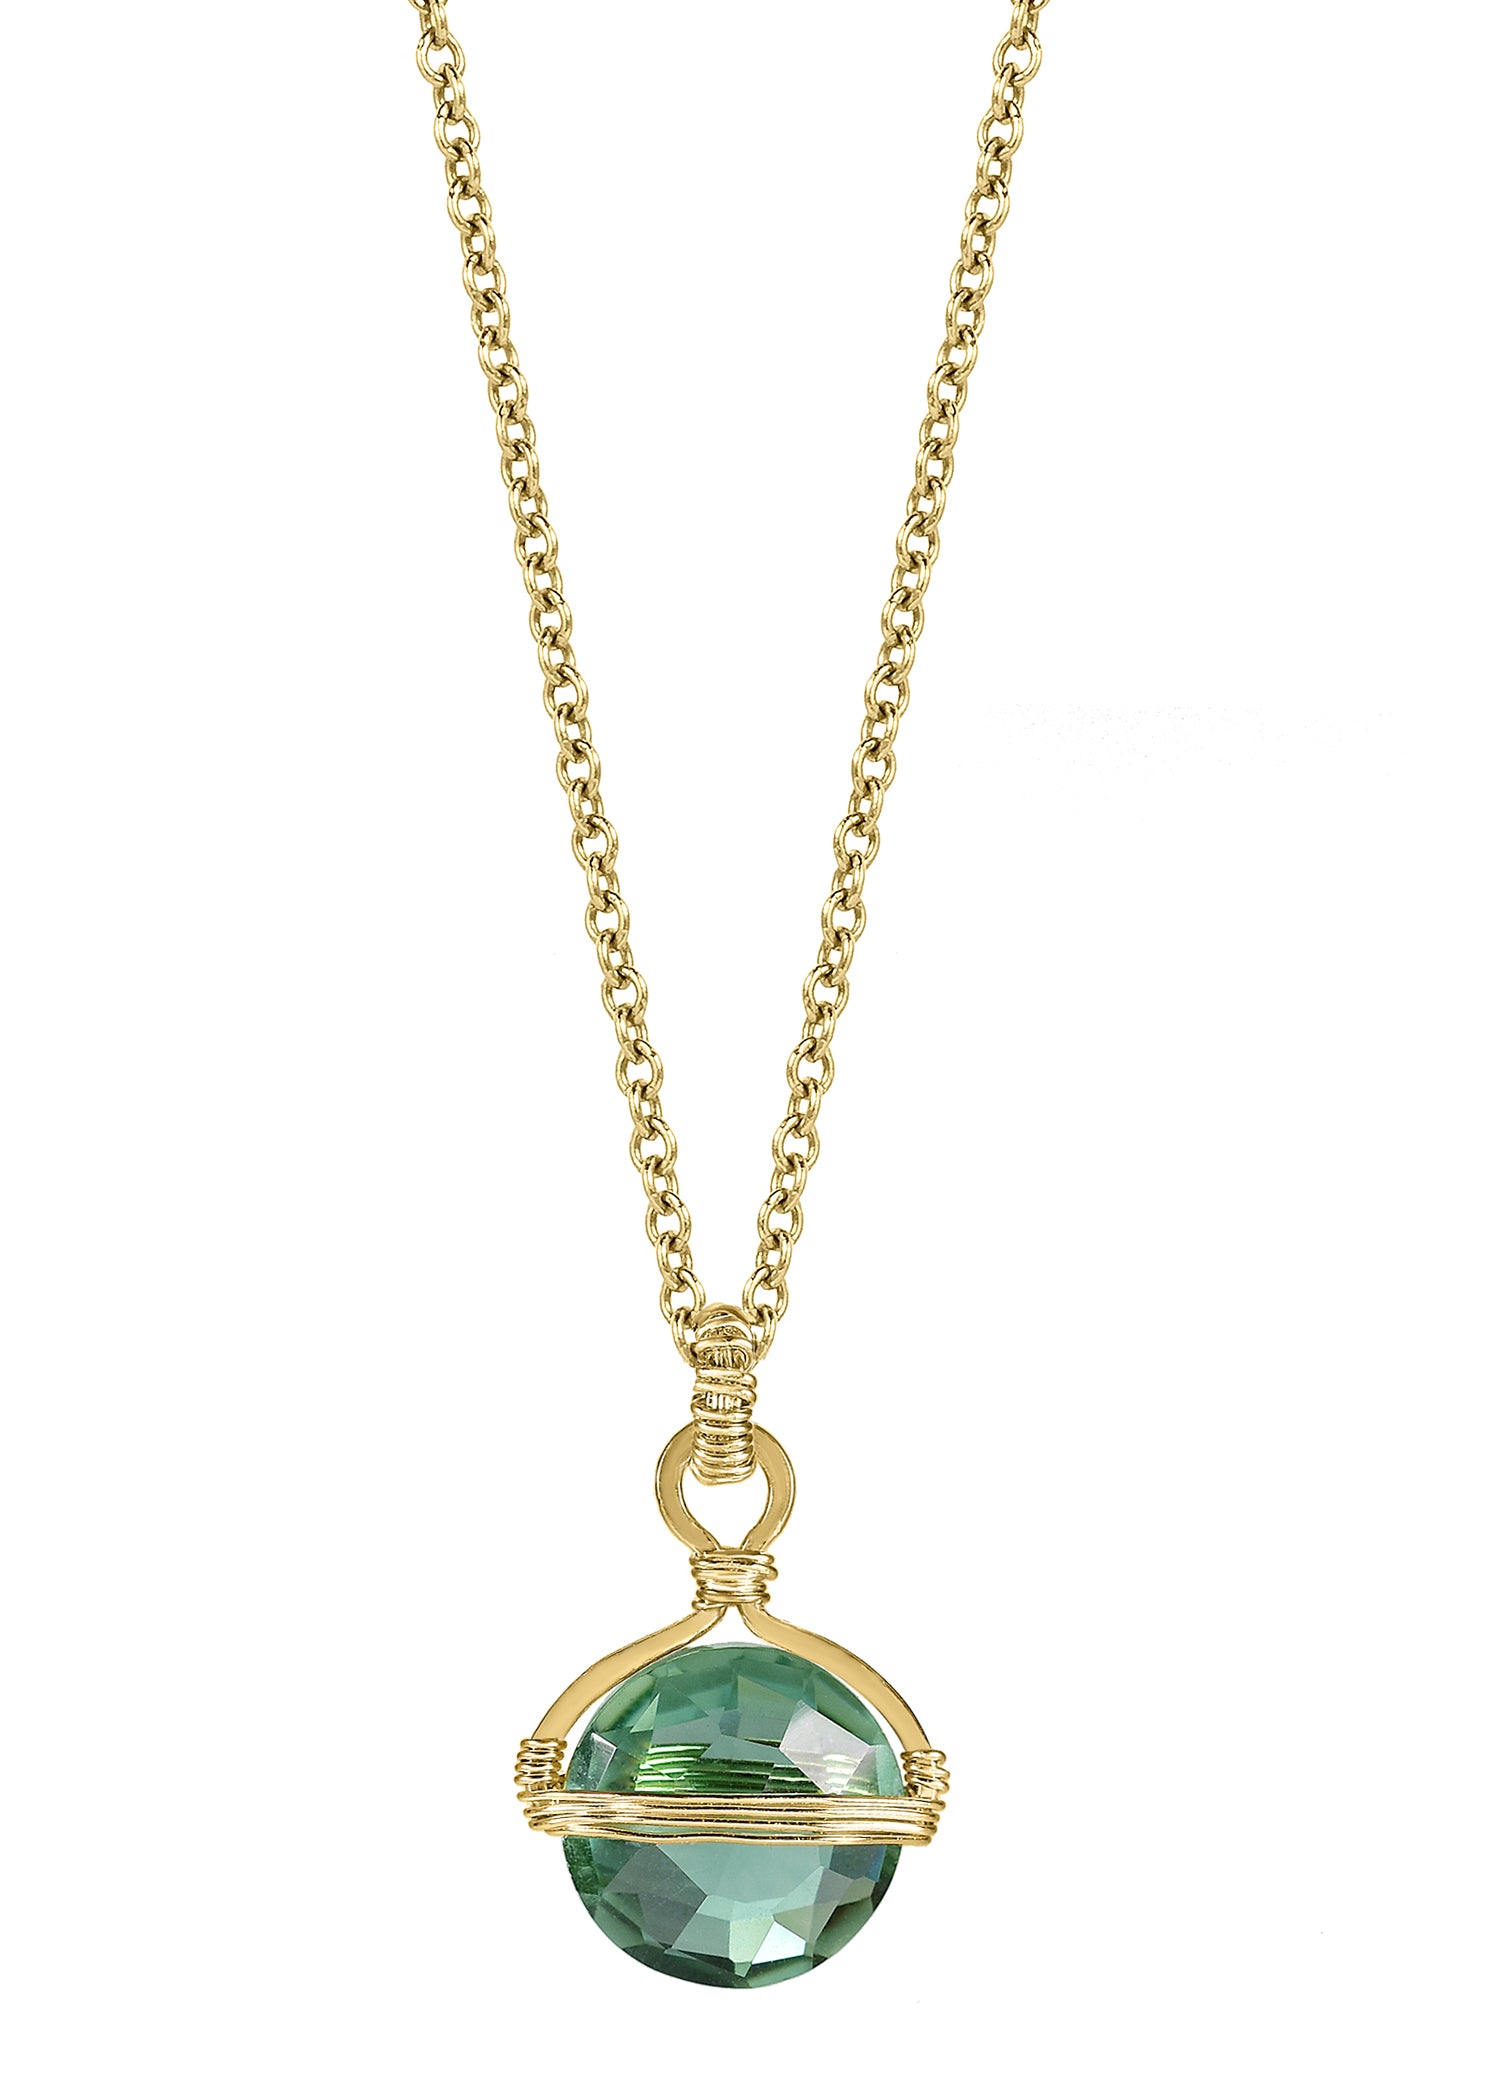 Green quartz 14k gold fill Necklace measures 16" in length Pendant measures 9/16" in length and 3/8" in width Handmade in our Los Angeles studio